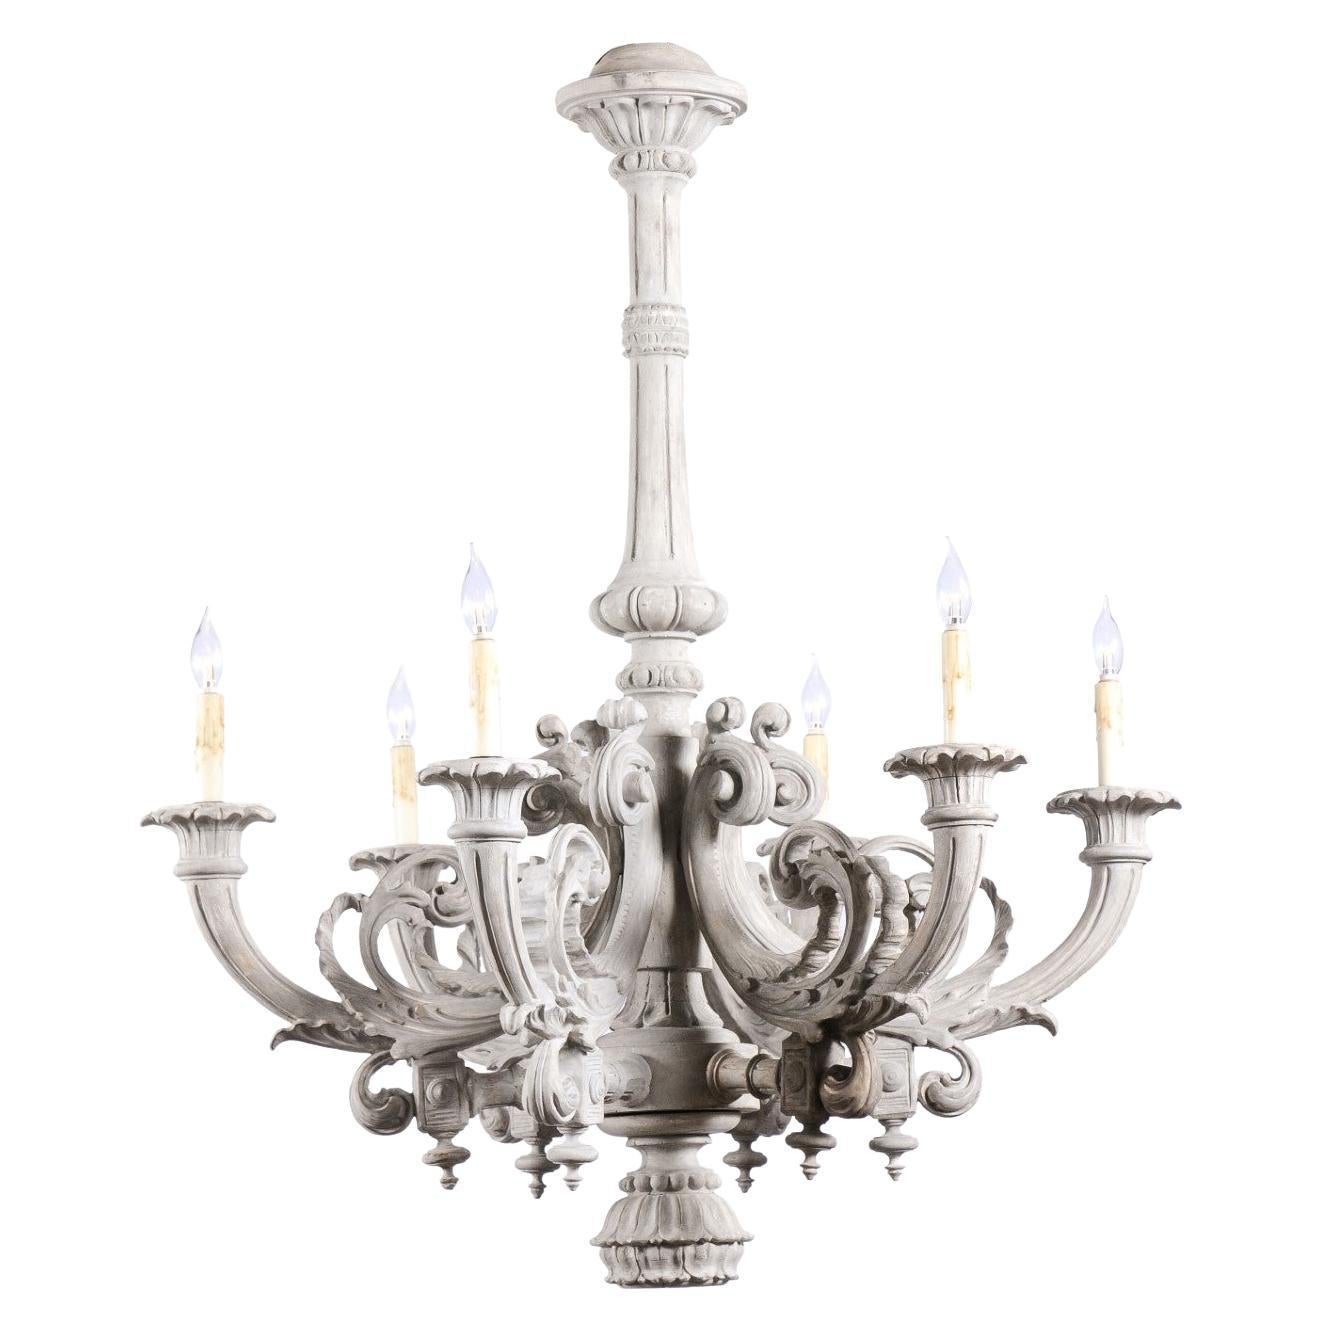 French Turn of the Century Painted Six-Light Chandelier with Scrolling Arms For Sale